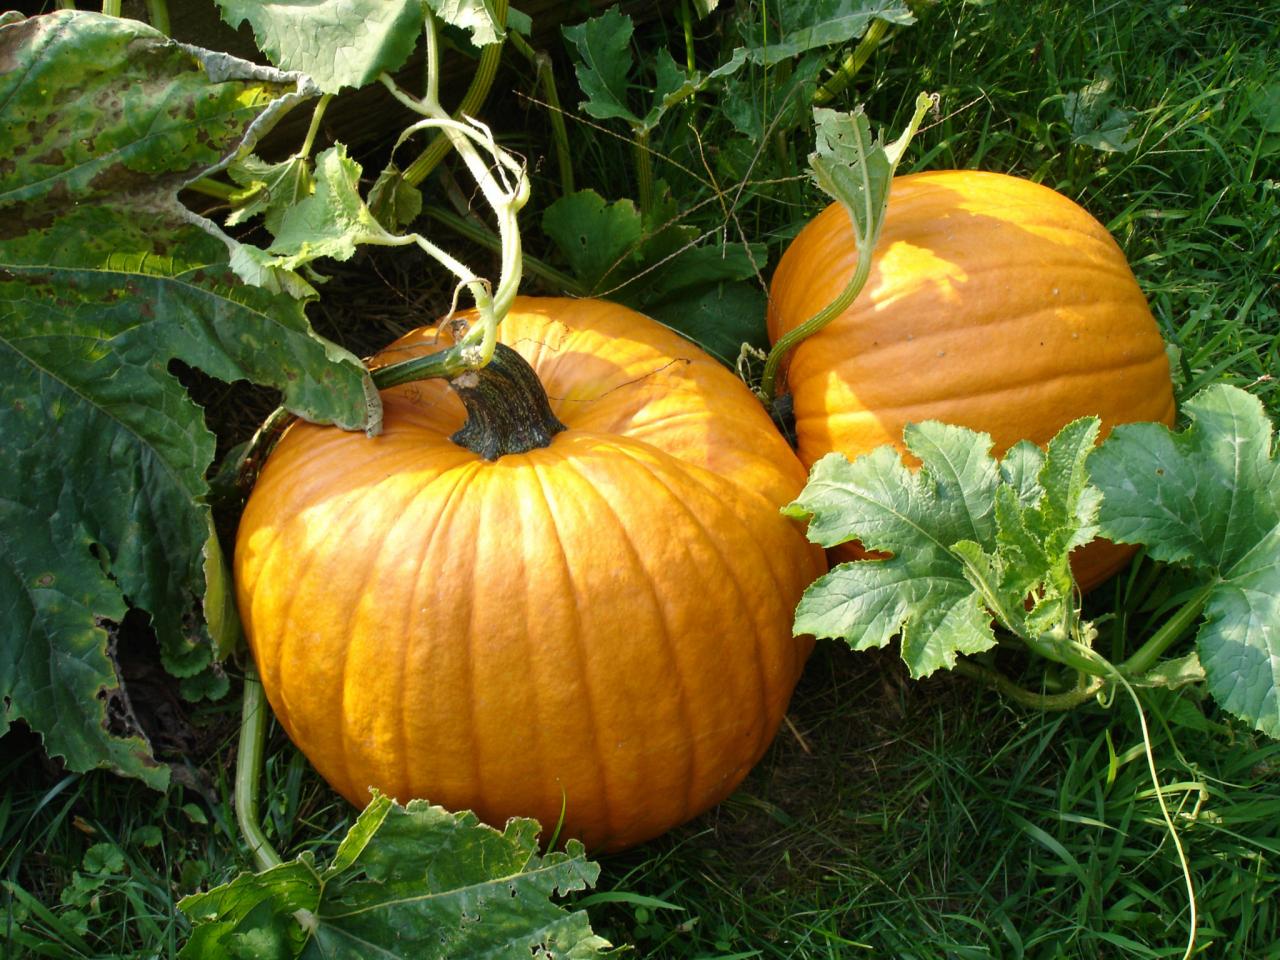 planting and growing pumpkins | pumpkin types to try | hgtv